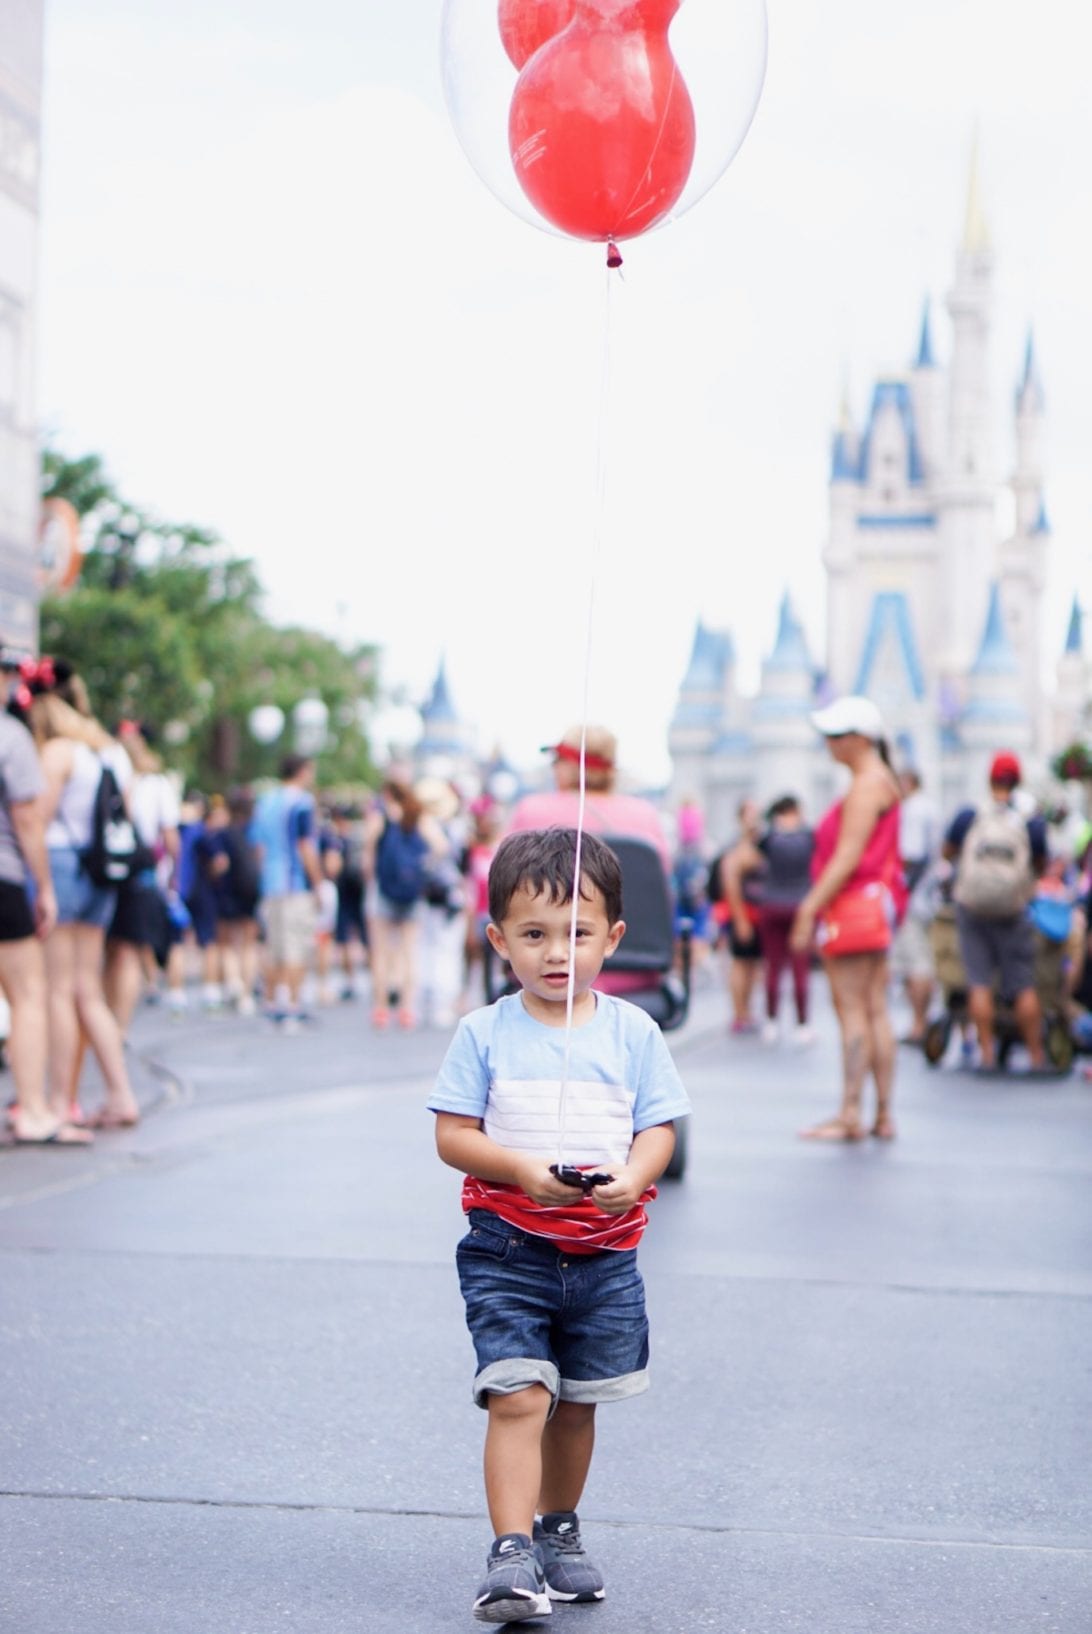 DISNEY WITH A TODDLER, TIPS FOR FAMILIES VISITING DISNEY, DISNEY WORLD, WHAT TO DO IN DISNEY WORLD, VISITING DISNEY WORLD, FIRST TIME IN DISNEY WORLD, VISITING DISNEY WORLD WITH A TODDLER